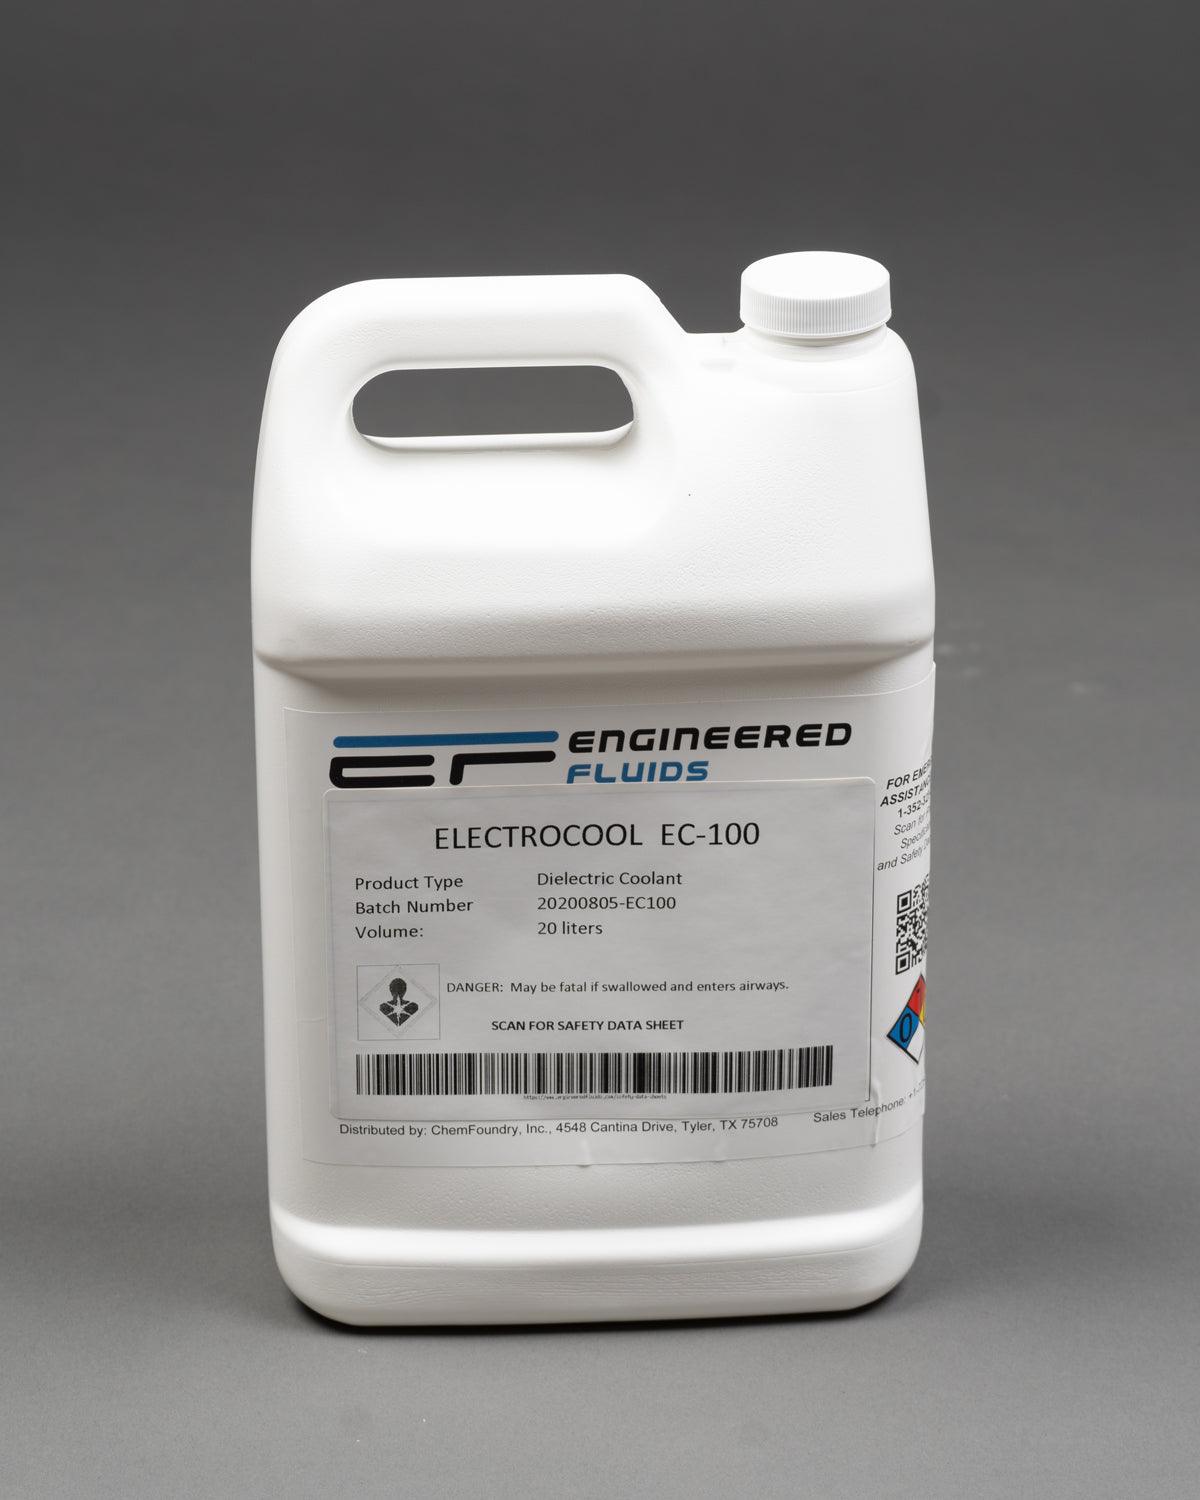 ElectroCool® EC-100 Dielectric Coolant - Engineered Fluids